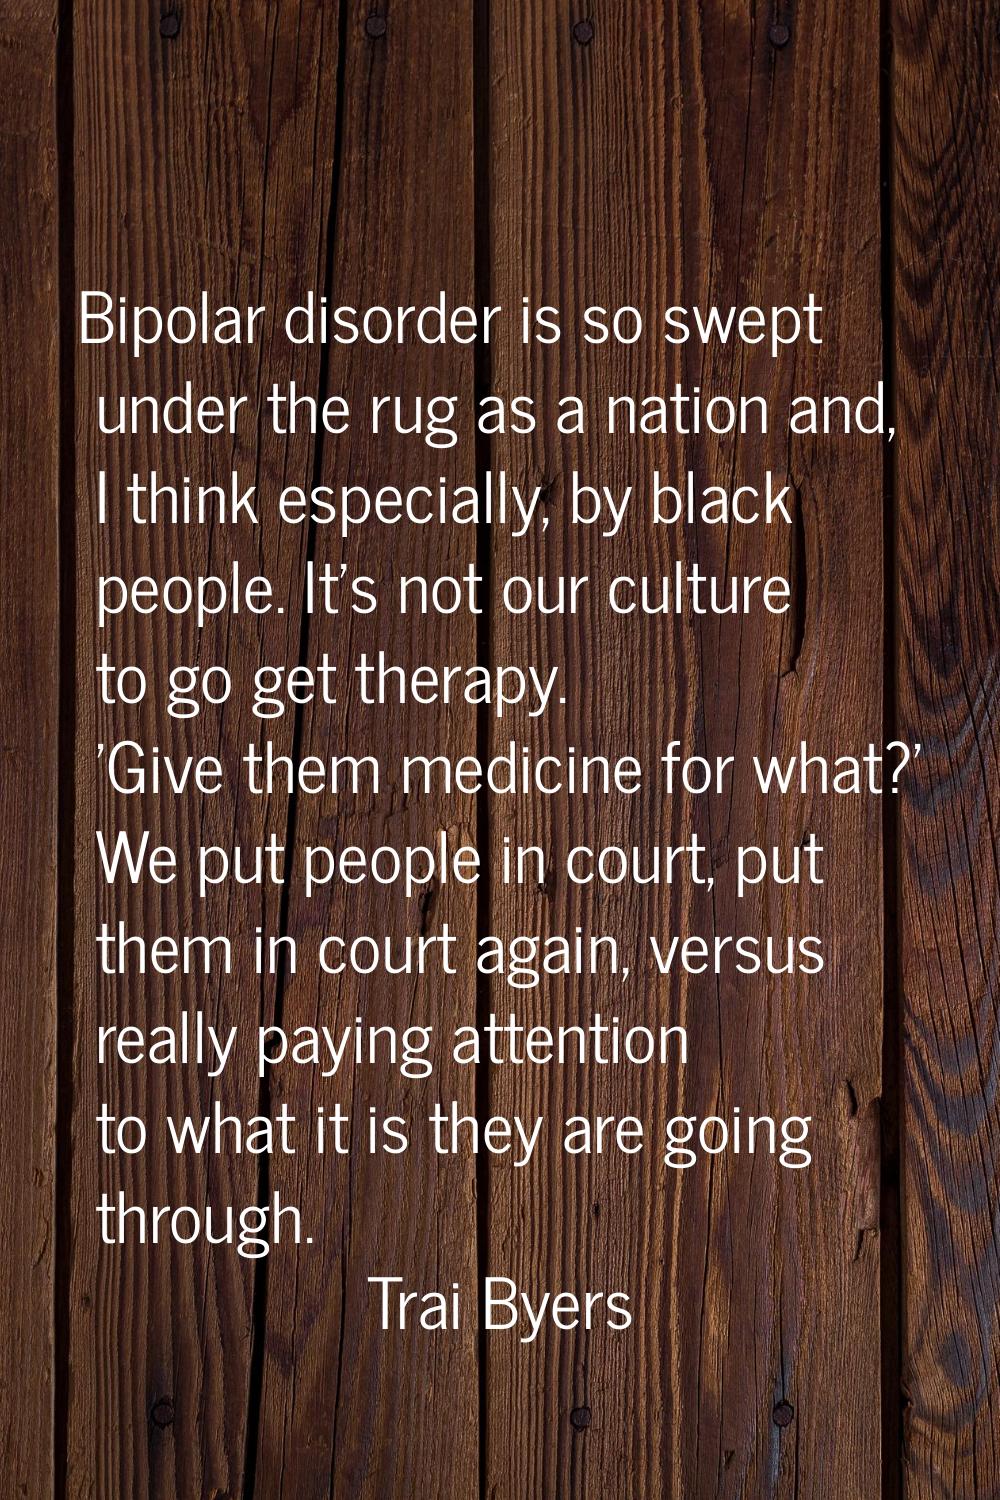 Bipolar disorder is so swept under the rug as a nation and, I think especially, by black people. It